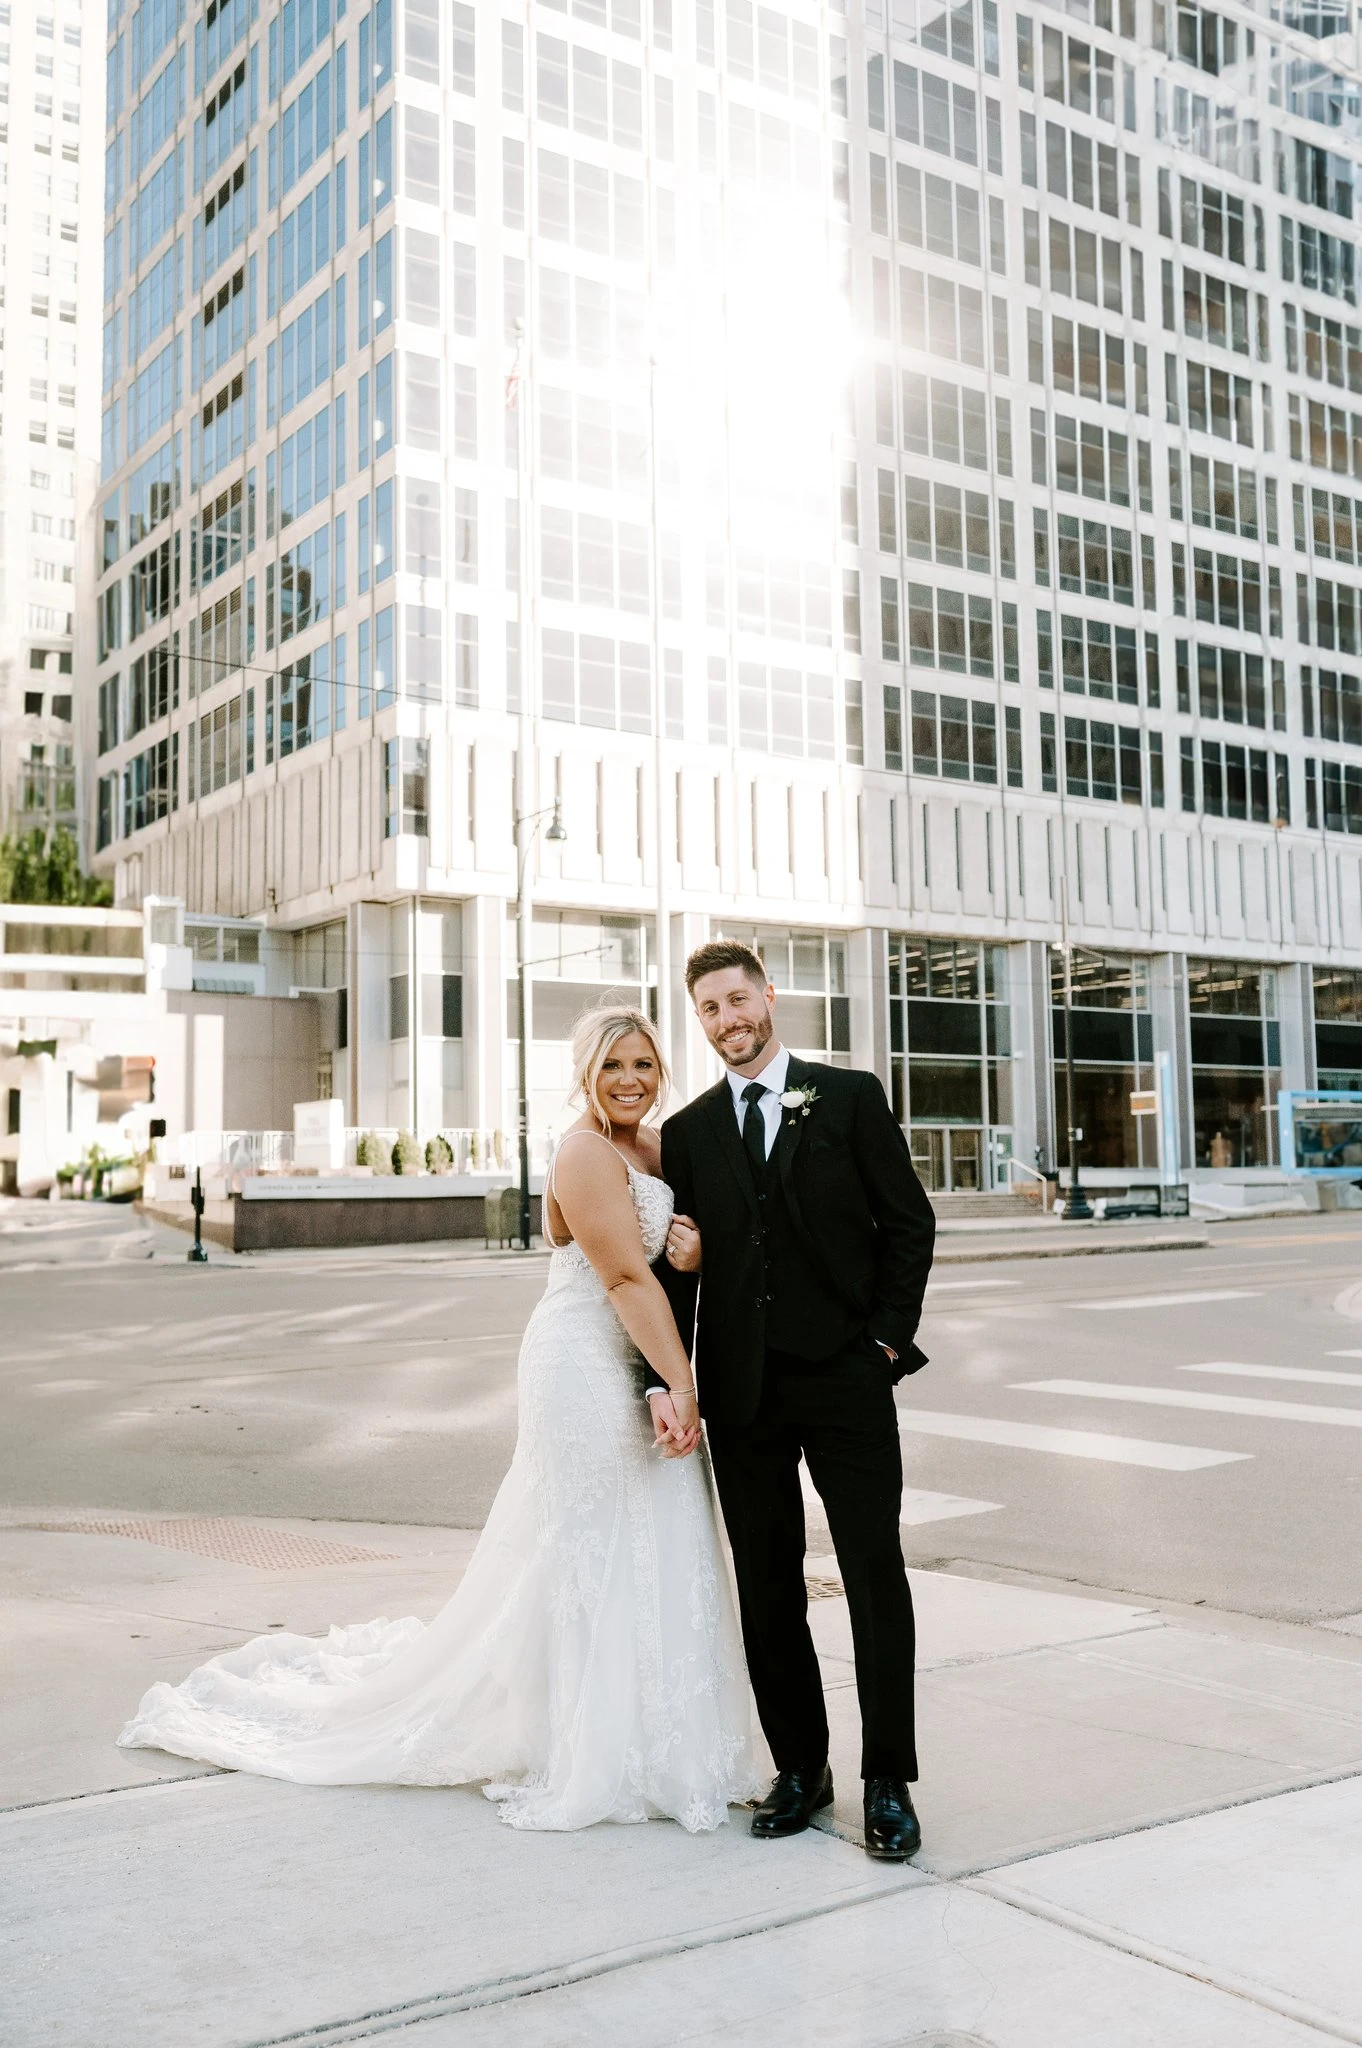 Bride and groom holding hands outside next to a skyscraper